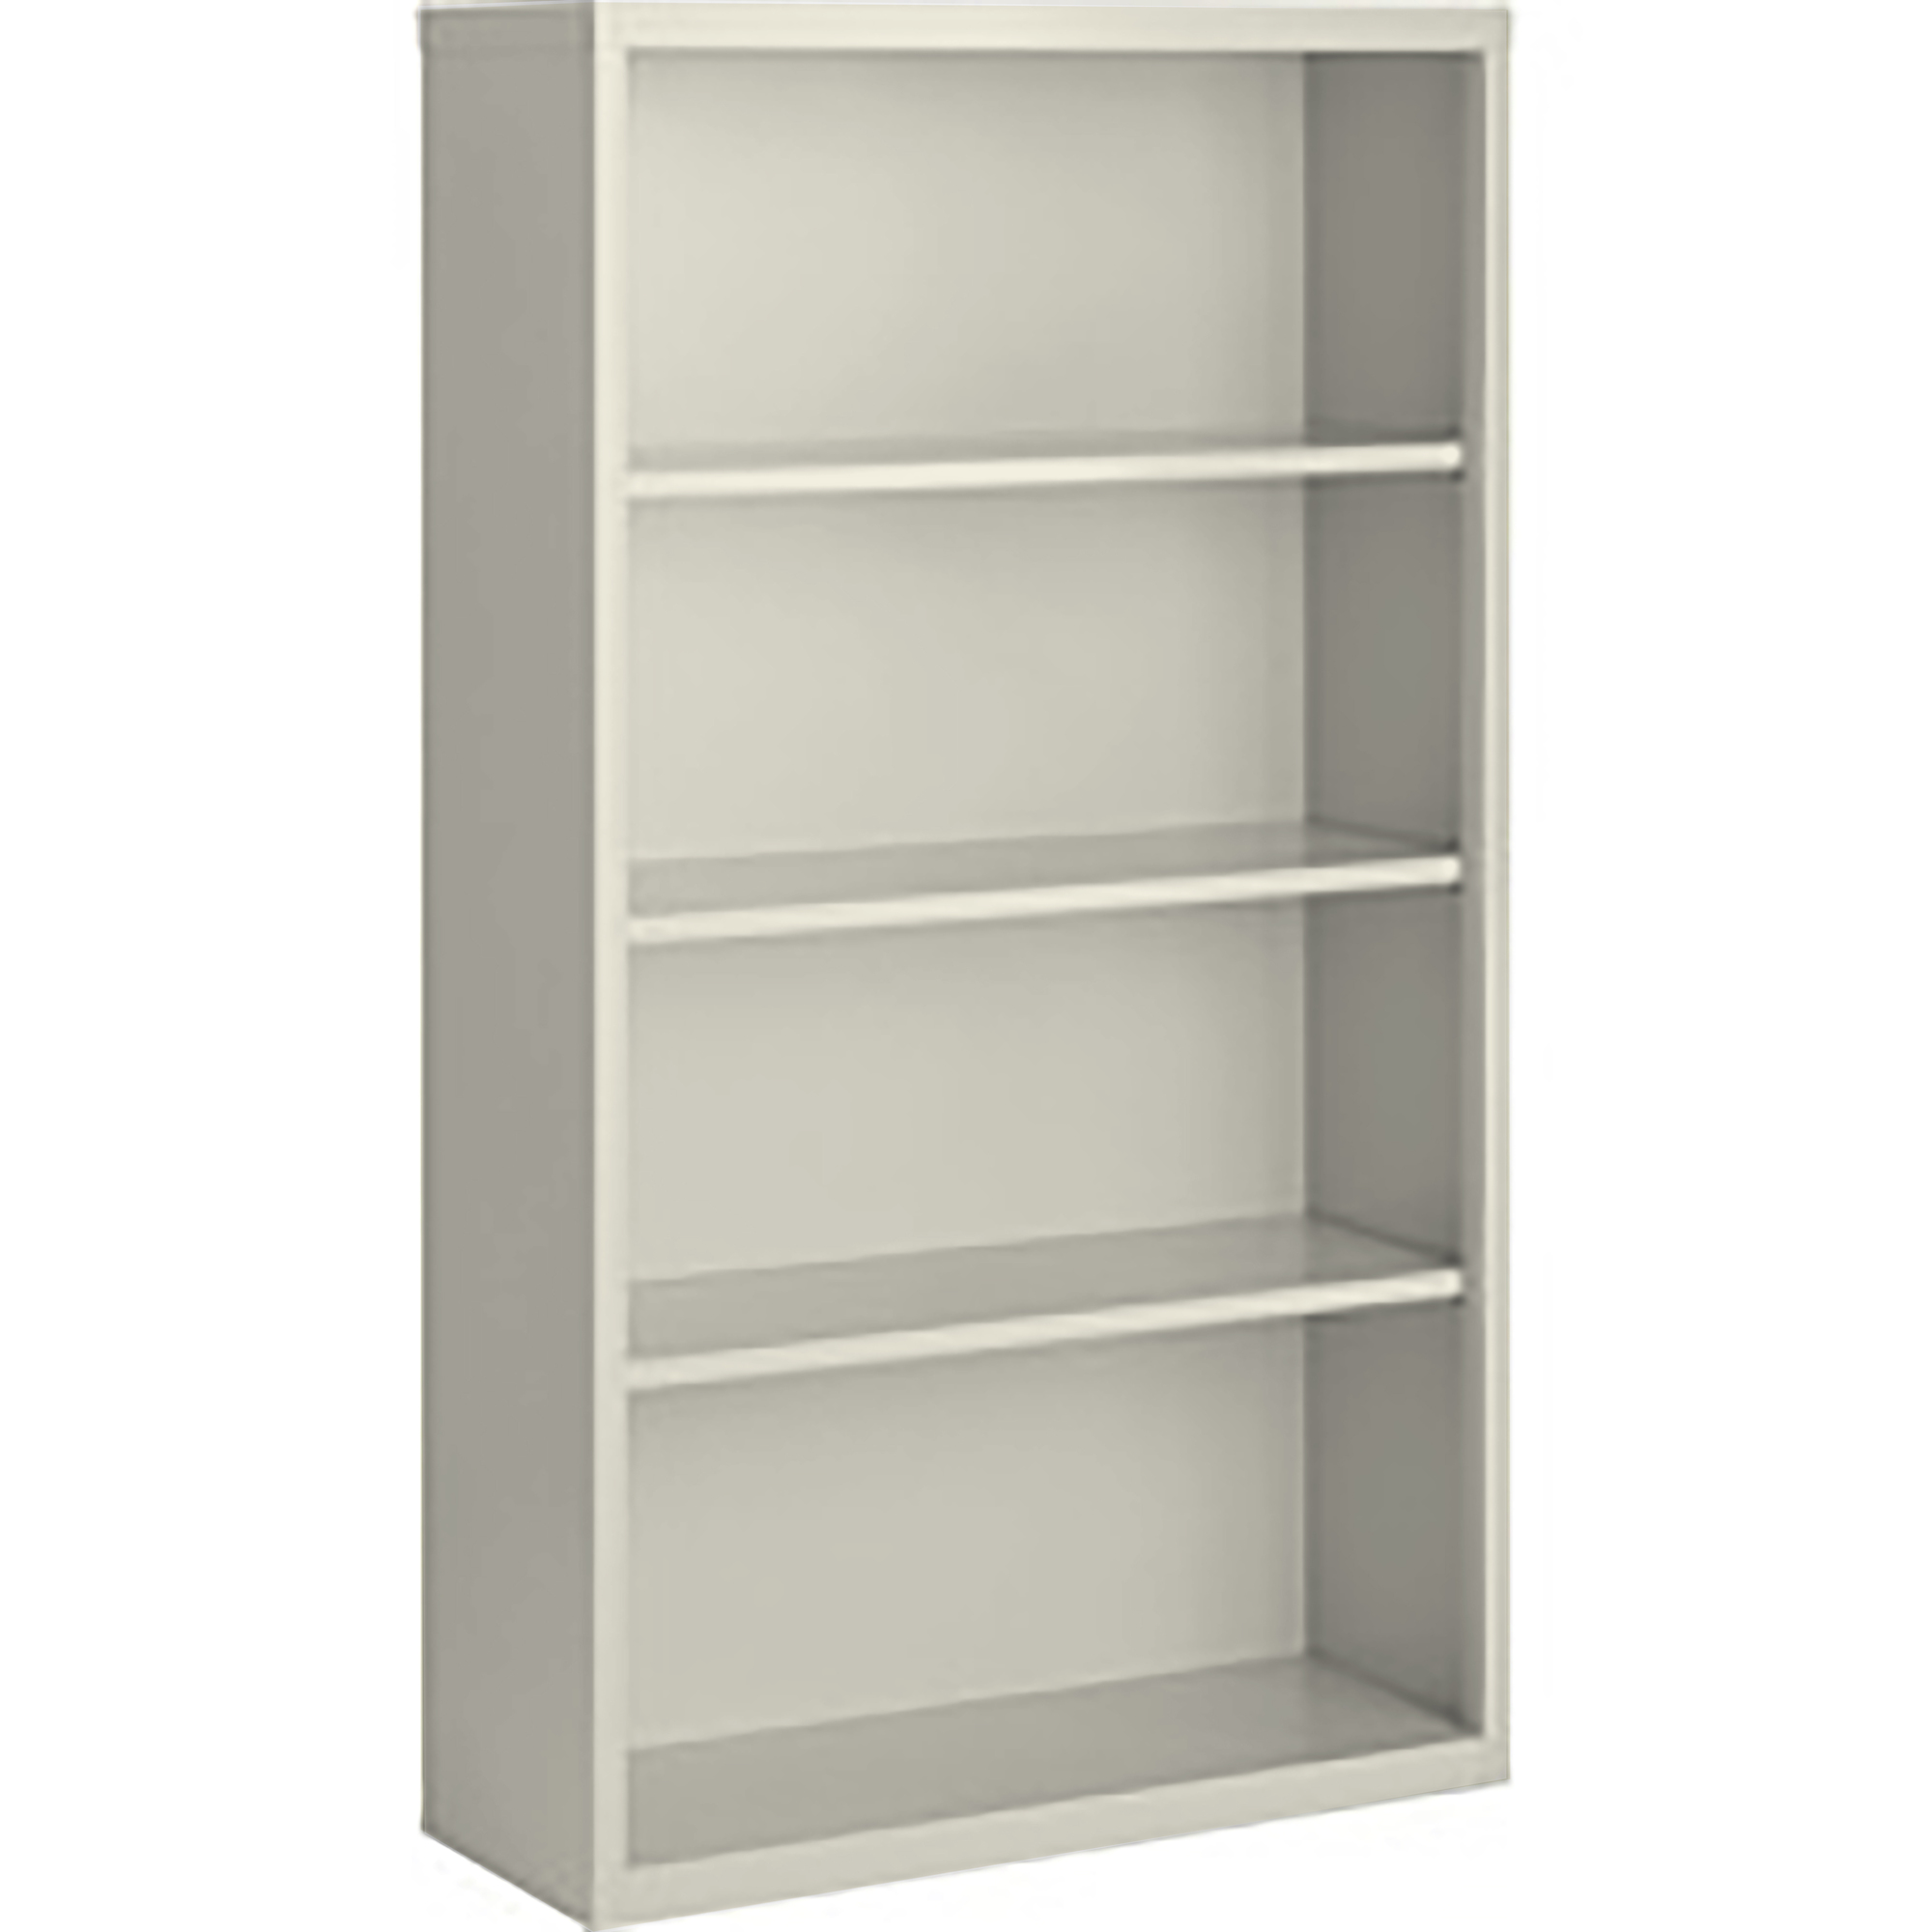 Steel Cabinets USA, 36Inchx18Inchx60Inch Putty Bookcase Steel Fully Assembled, Height 60 in, Shelves (qty.) 4, Material Steel, Model BCA-366018-P